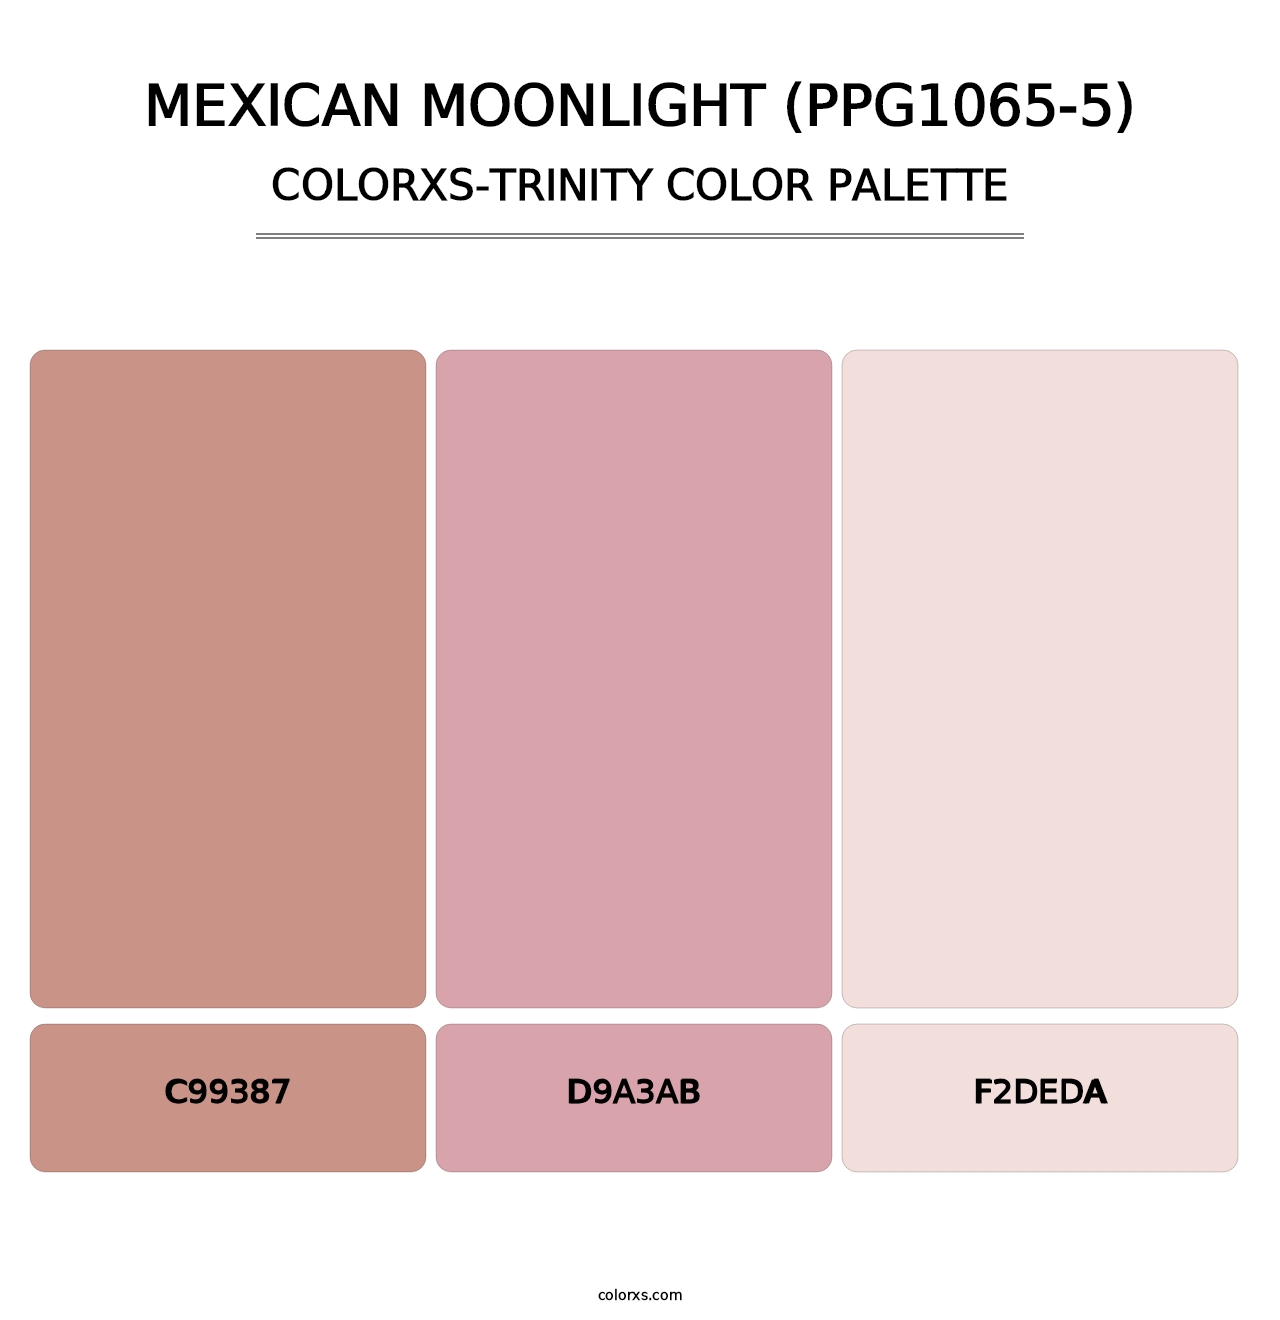 Mexican Moonlight (PPG1065-5) - Colorxs Trinity Palette